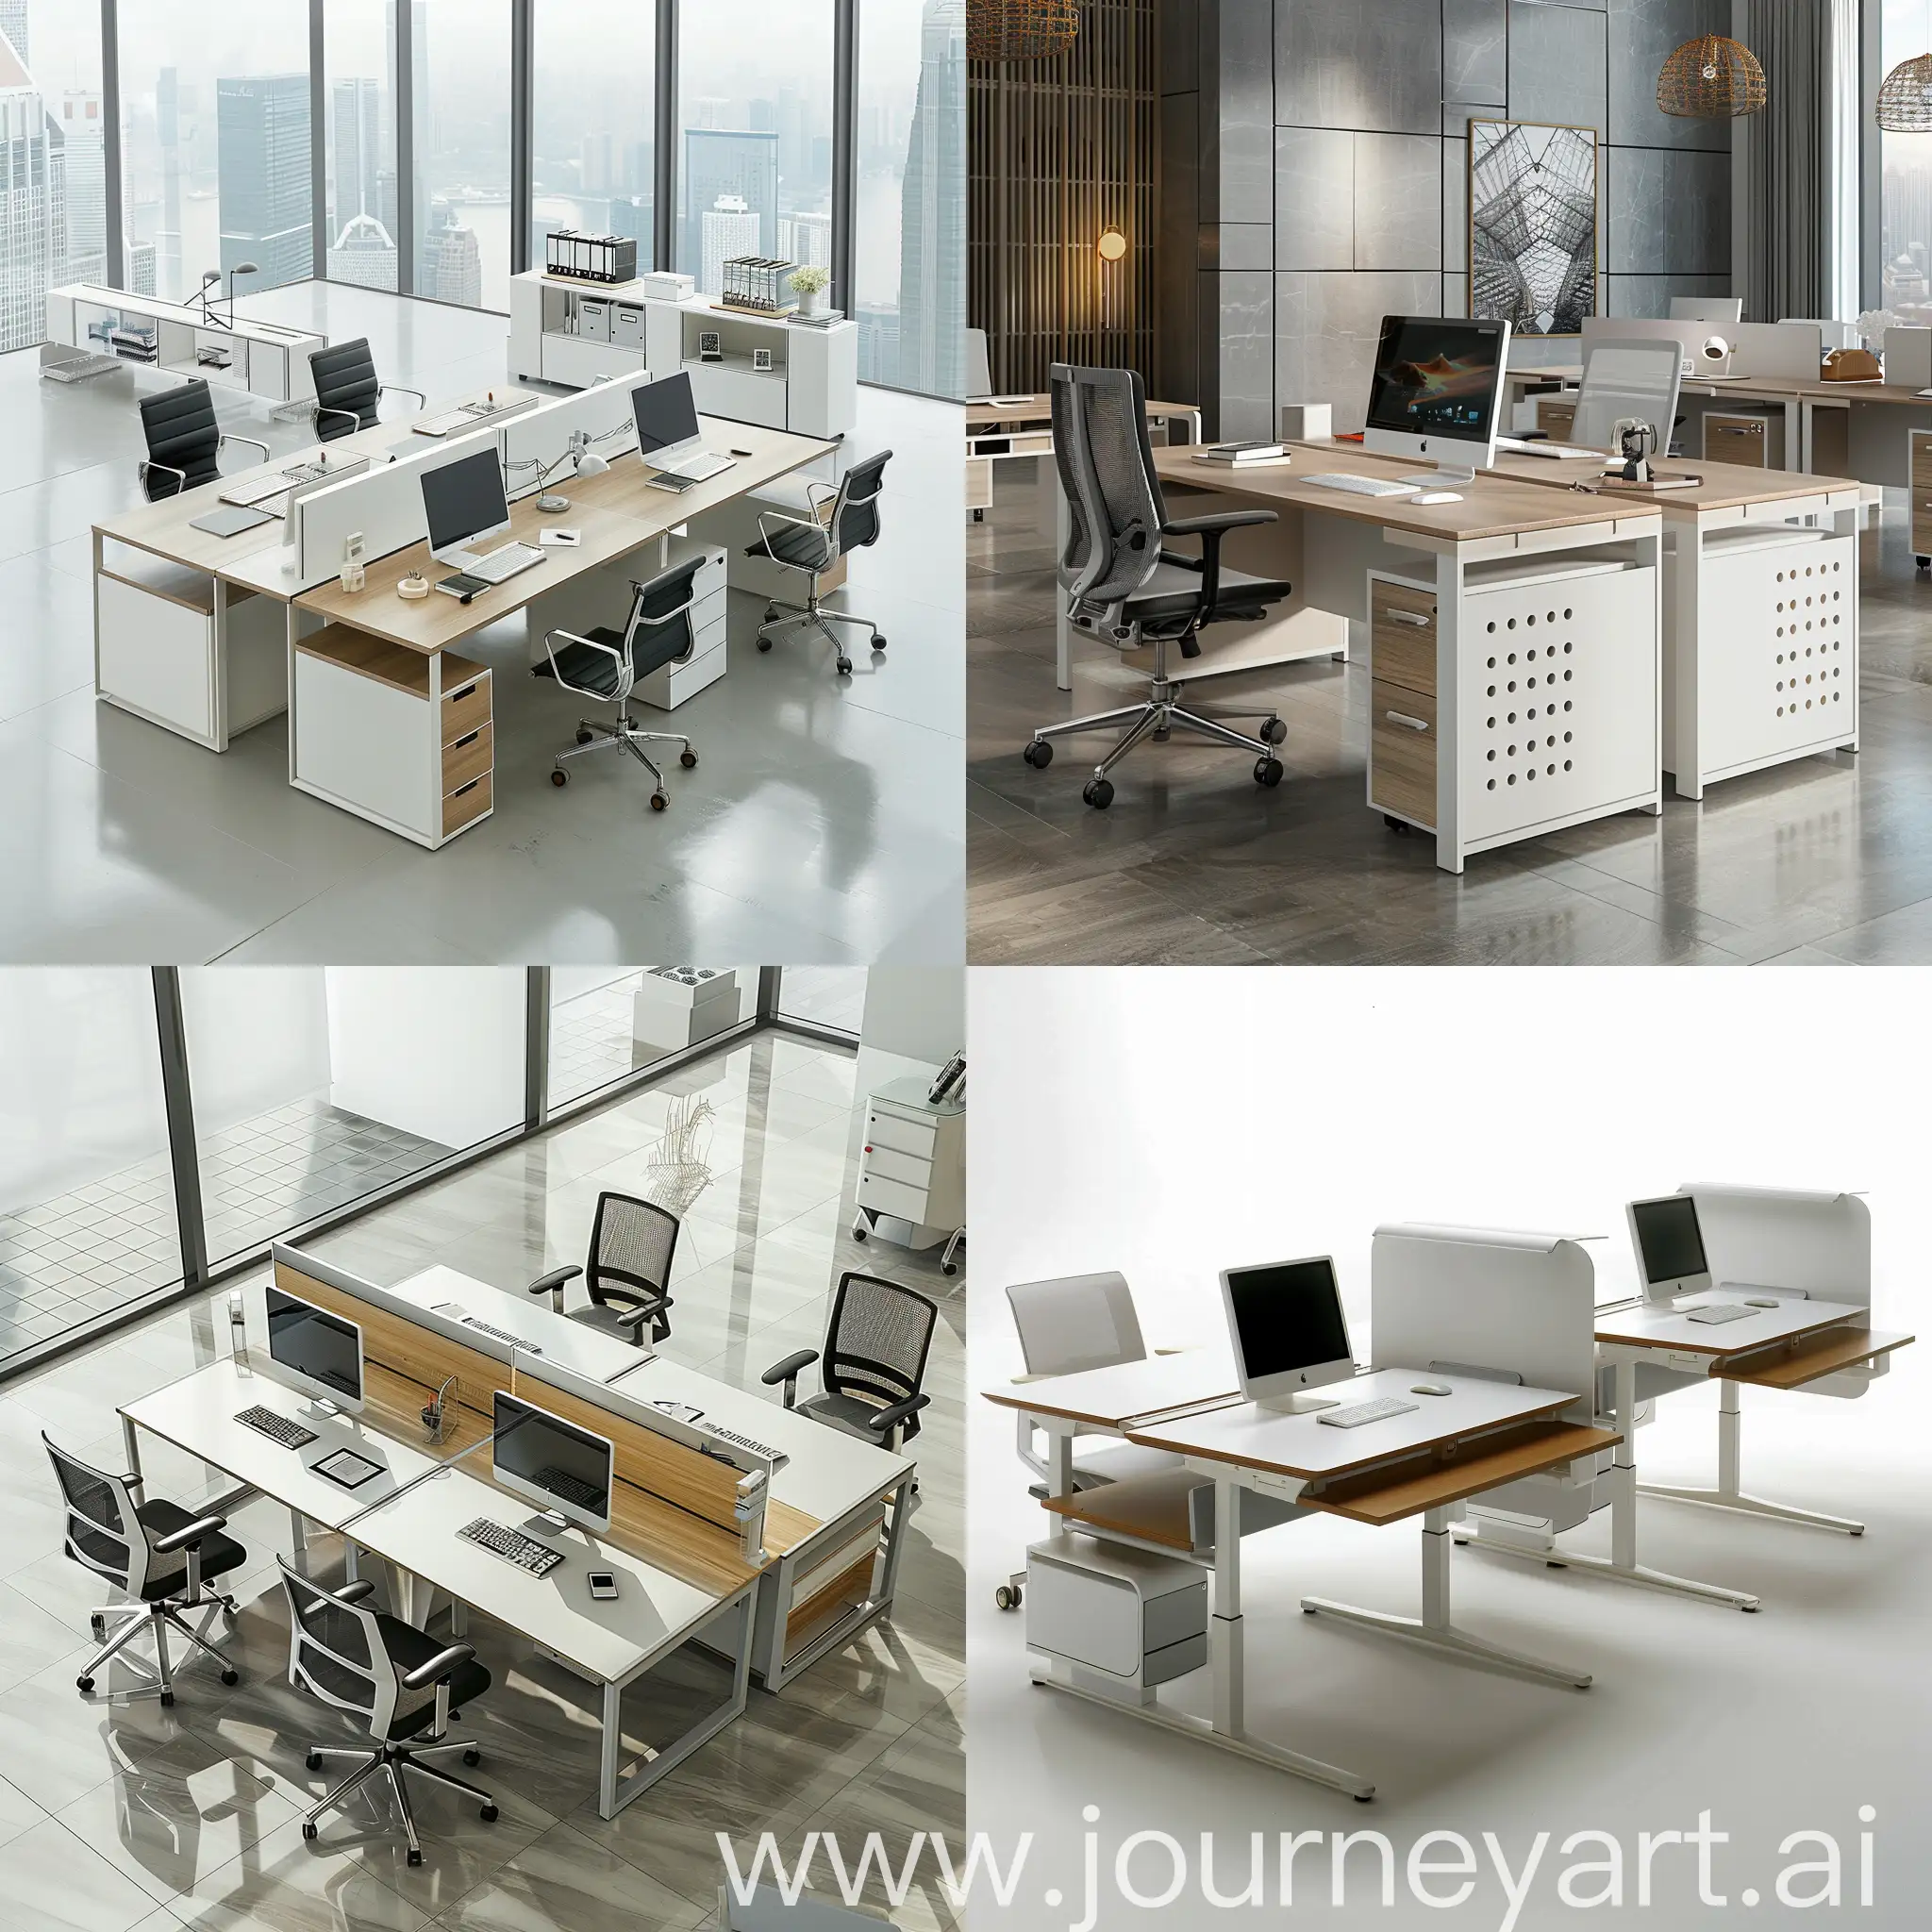 workstation desks, administrative office, reductionism style design, metal and wood, white colour.